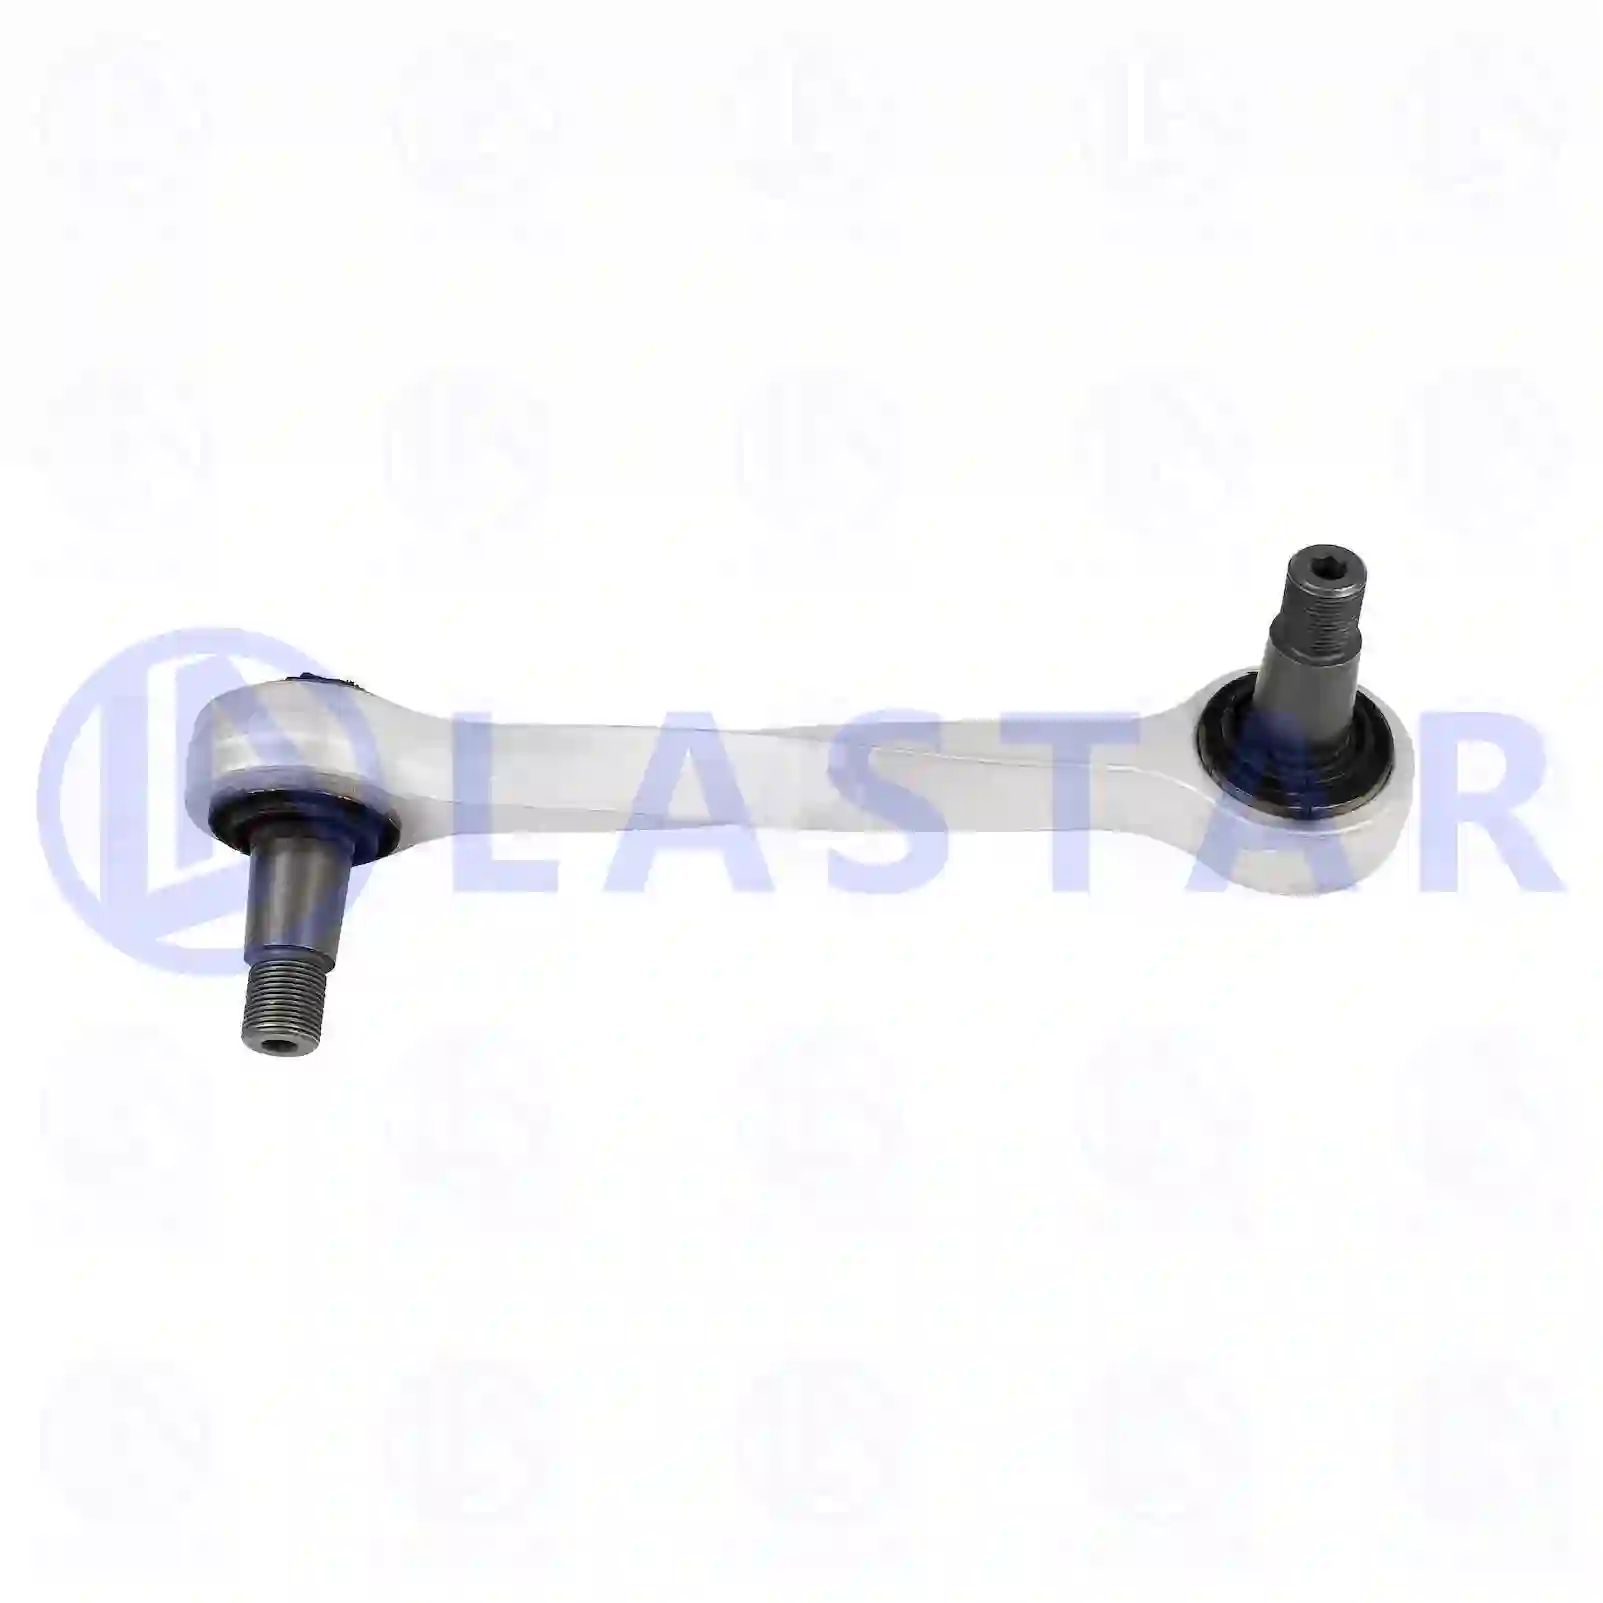  Stabilizer stay, right || Lastar Spare Part | Truck Spare Parts, Auotomotive Spare Parts